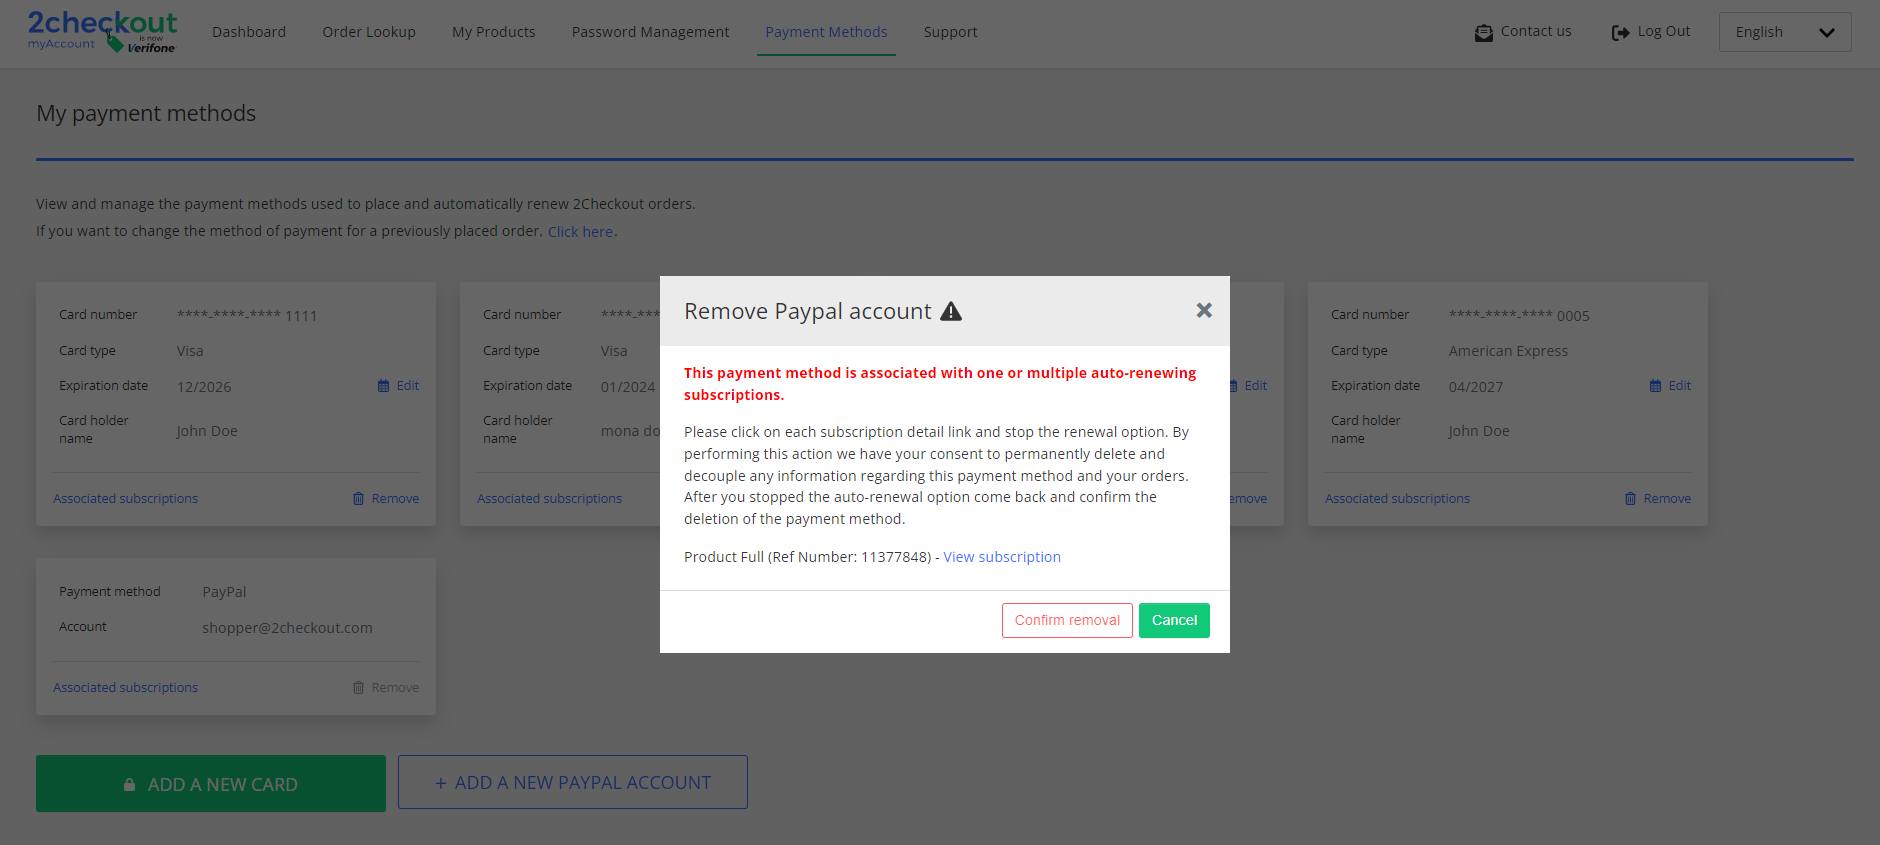 Payment methods - delete paypal modal